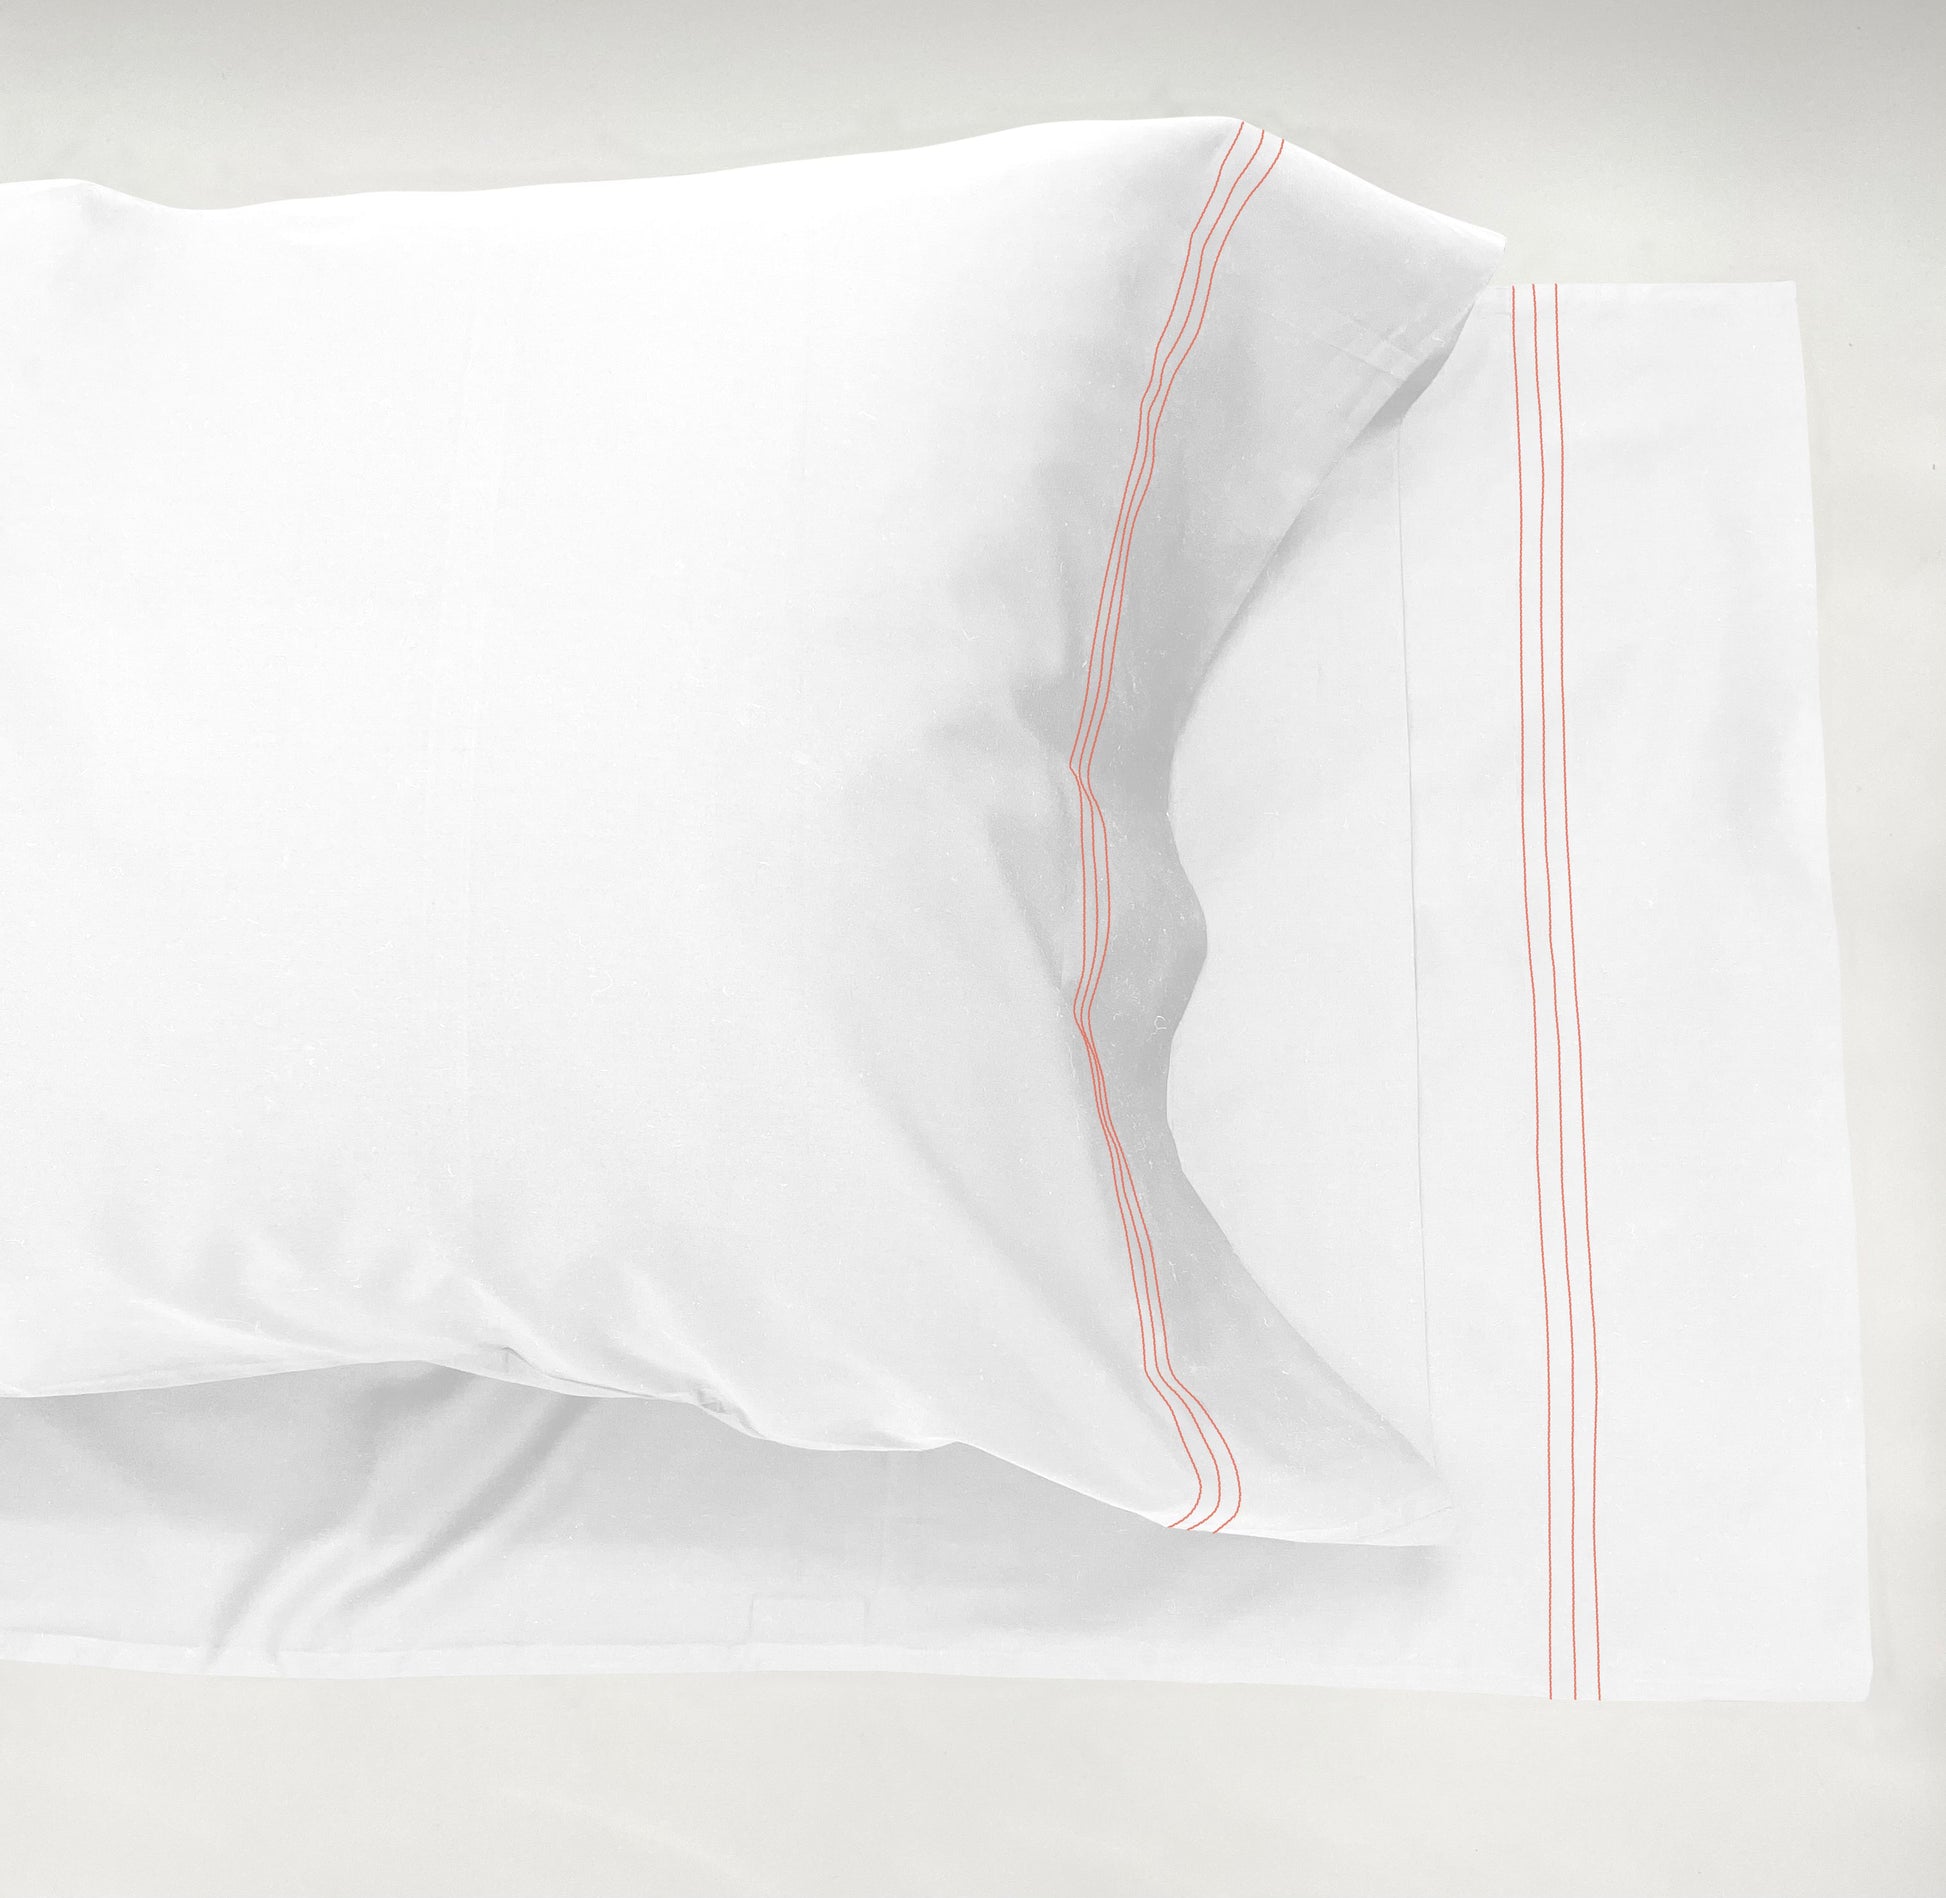 Narragansett White Pillow Case with a triple contrasting stitch in Lobster.